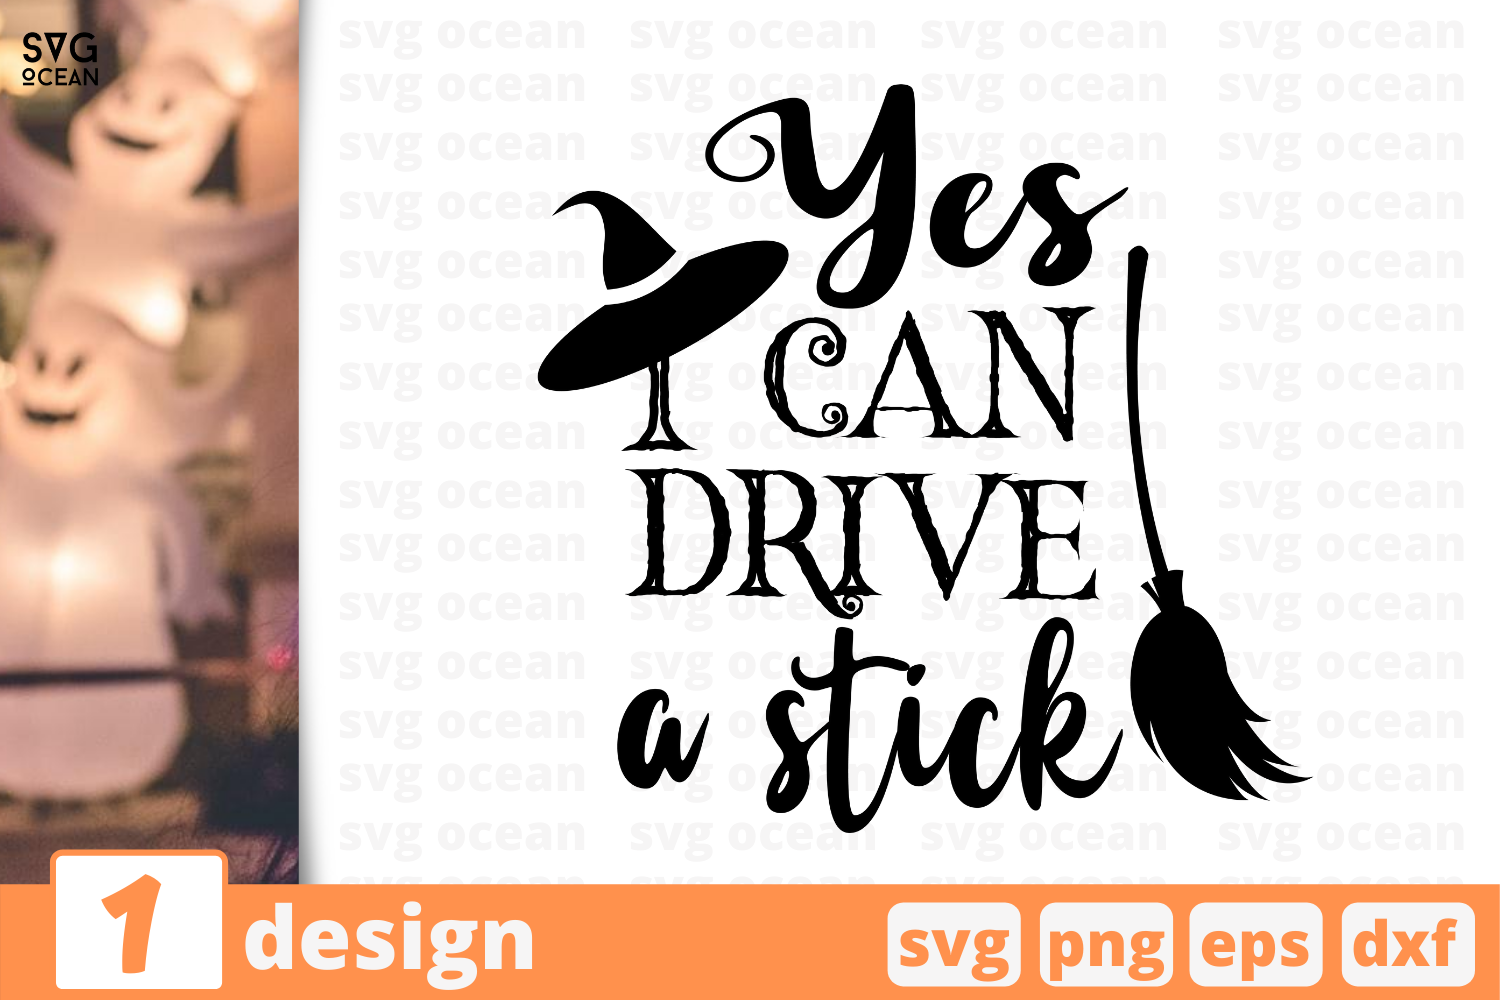 1 Yes I Can Drive A Stick Halloween Quotes Cricut Svg By Svgocean Thehungryjpeg Com